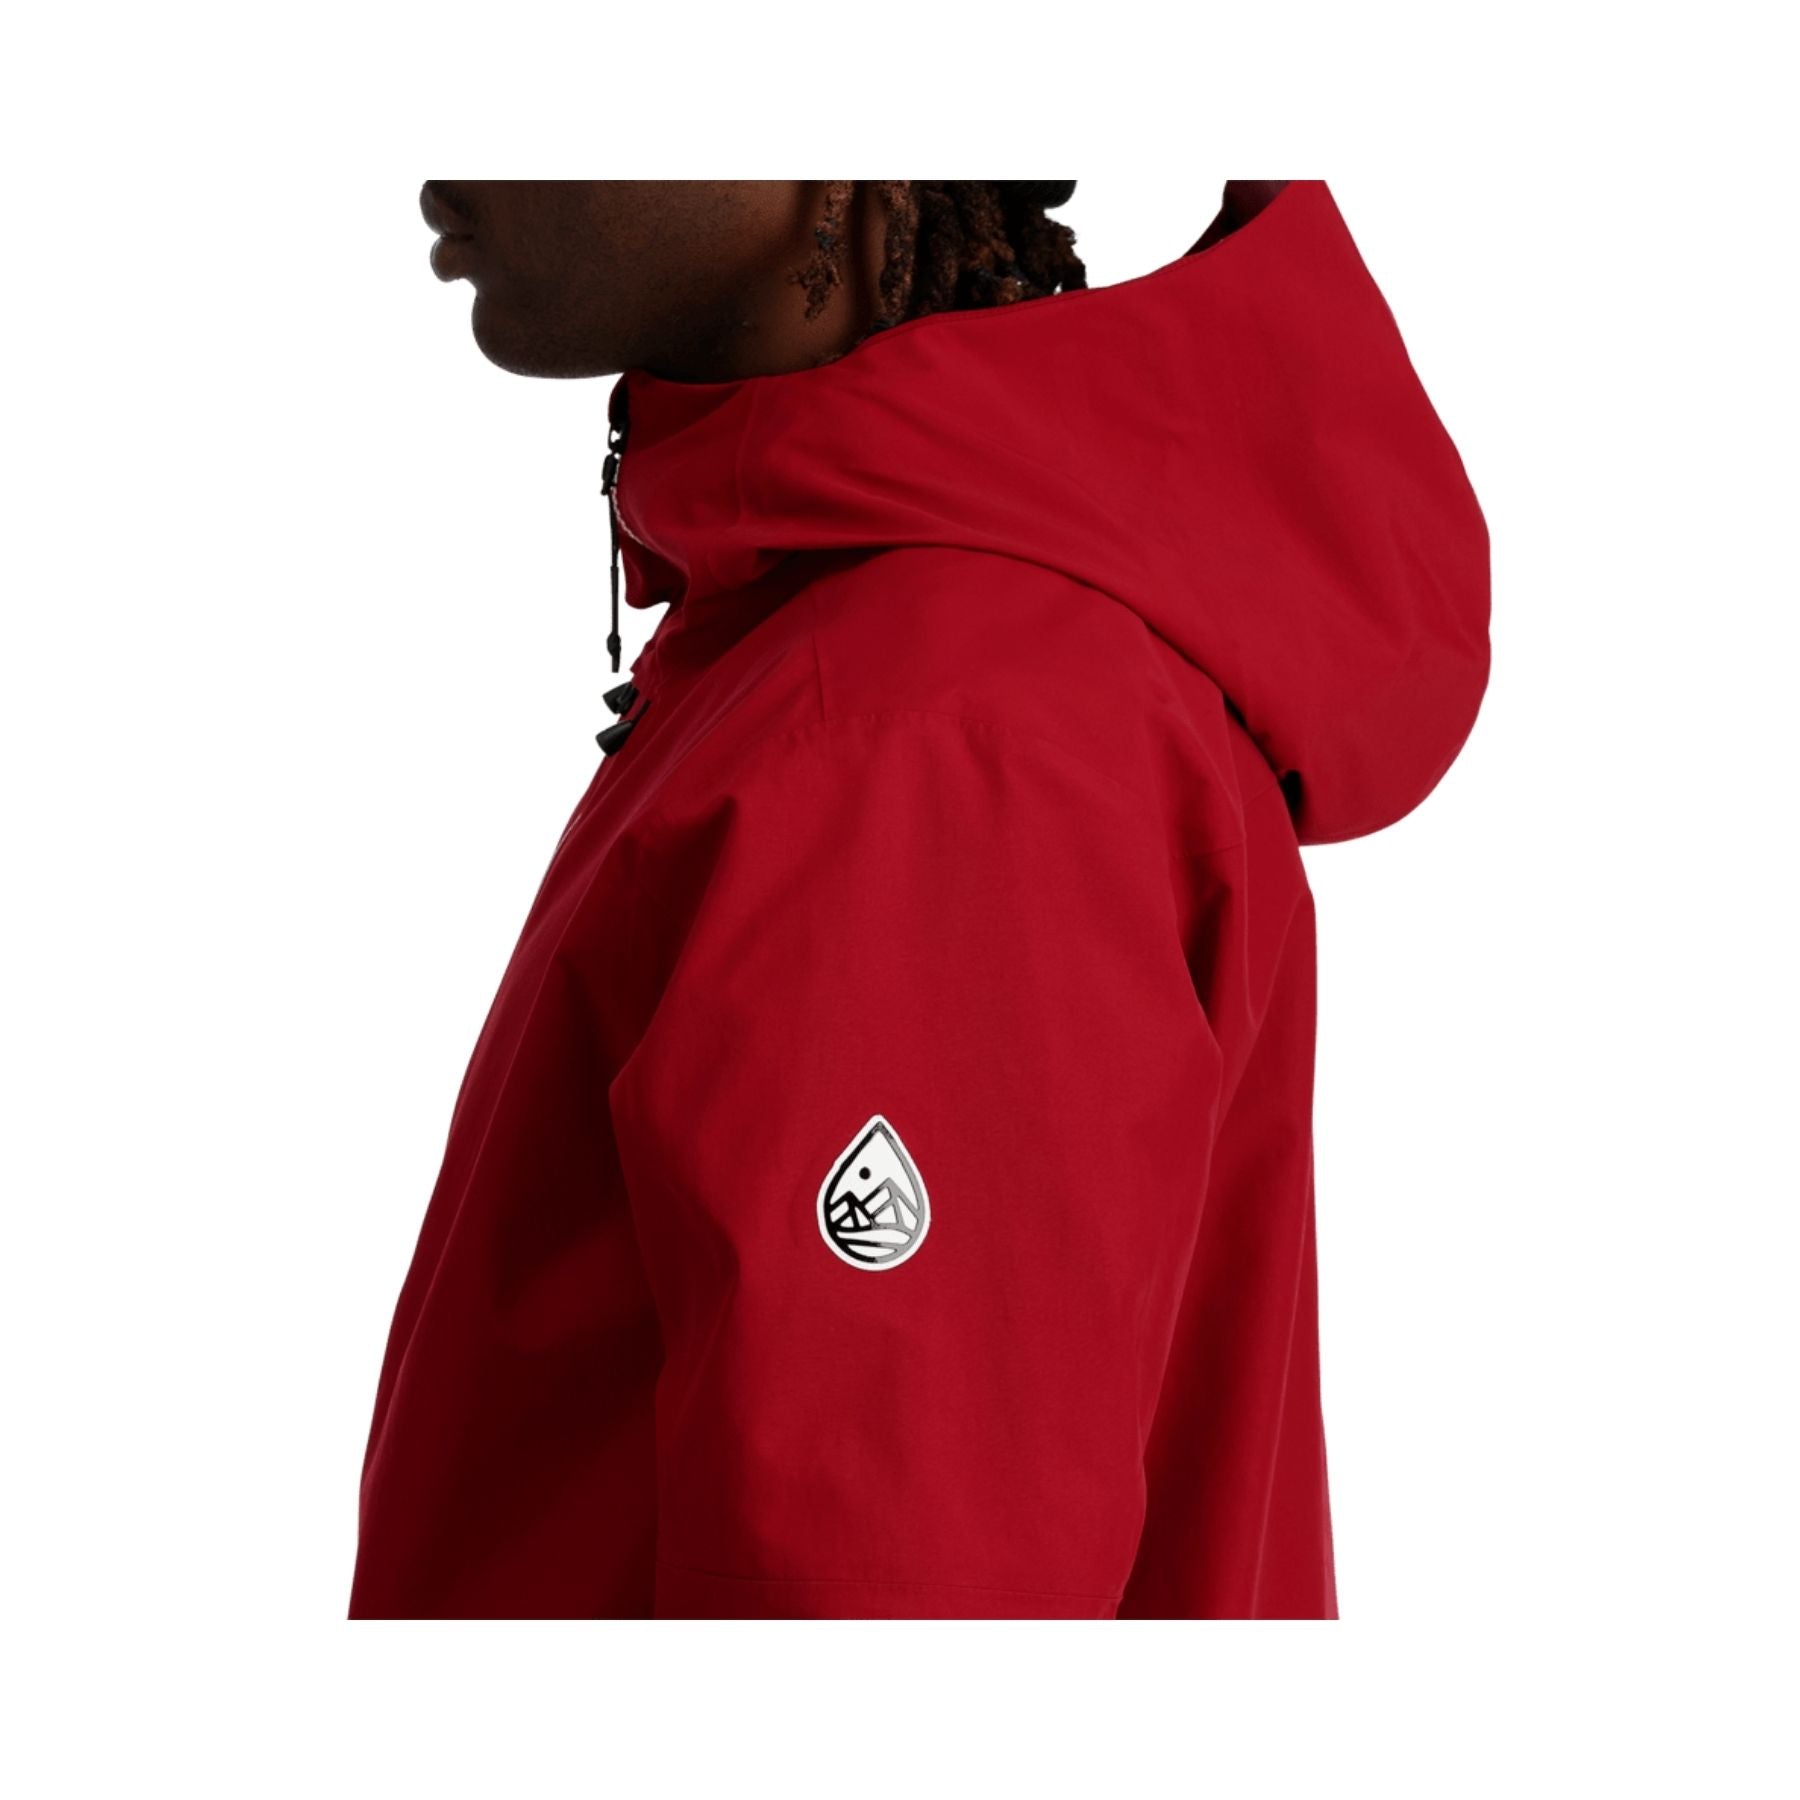 Spyder Jagged Gore-Tex Jacket in Mineral Red